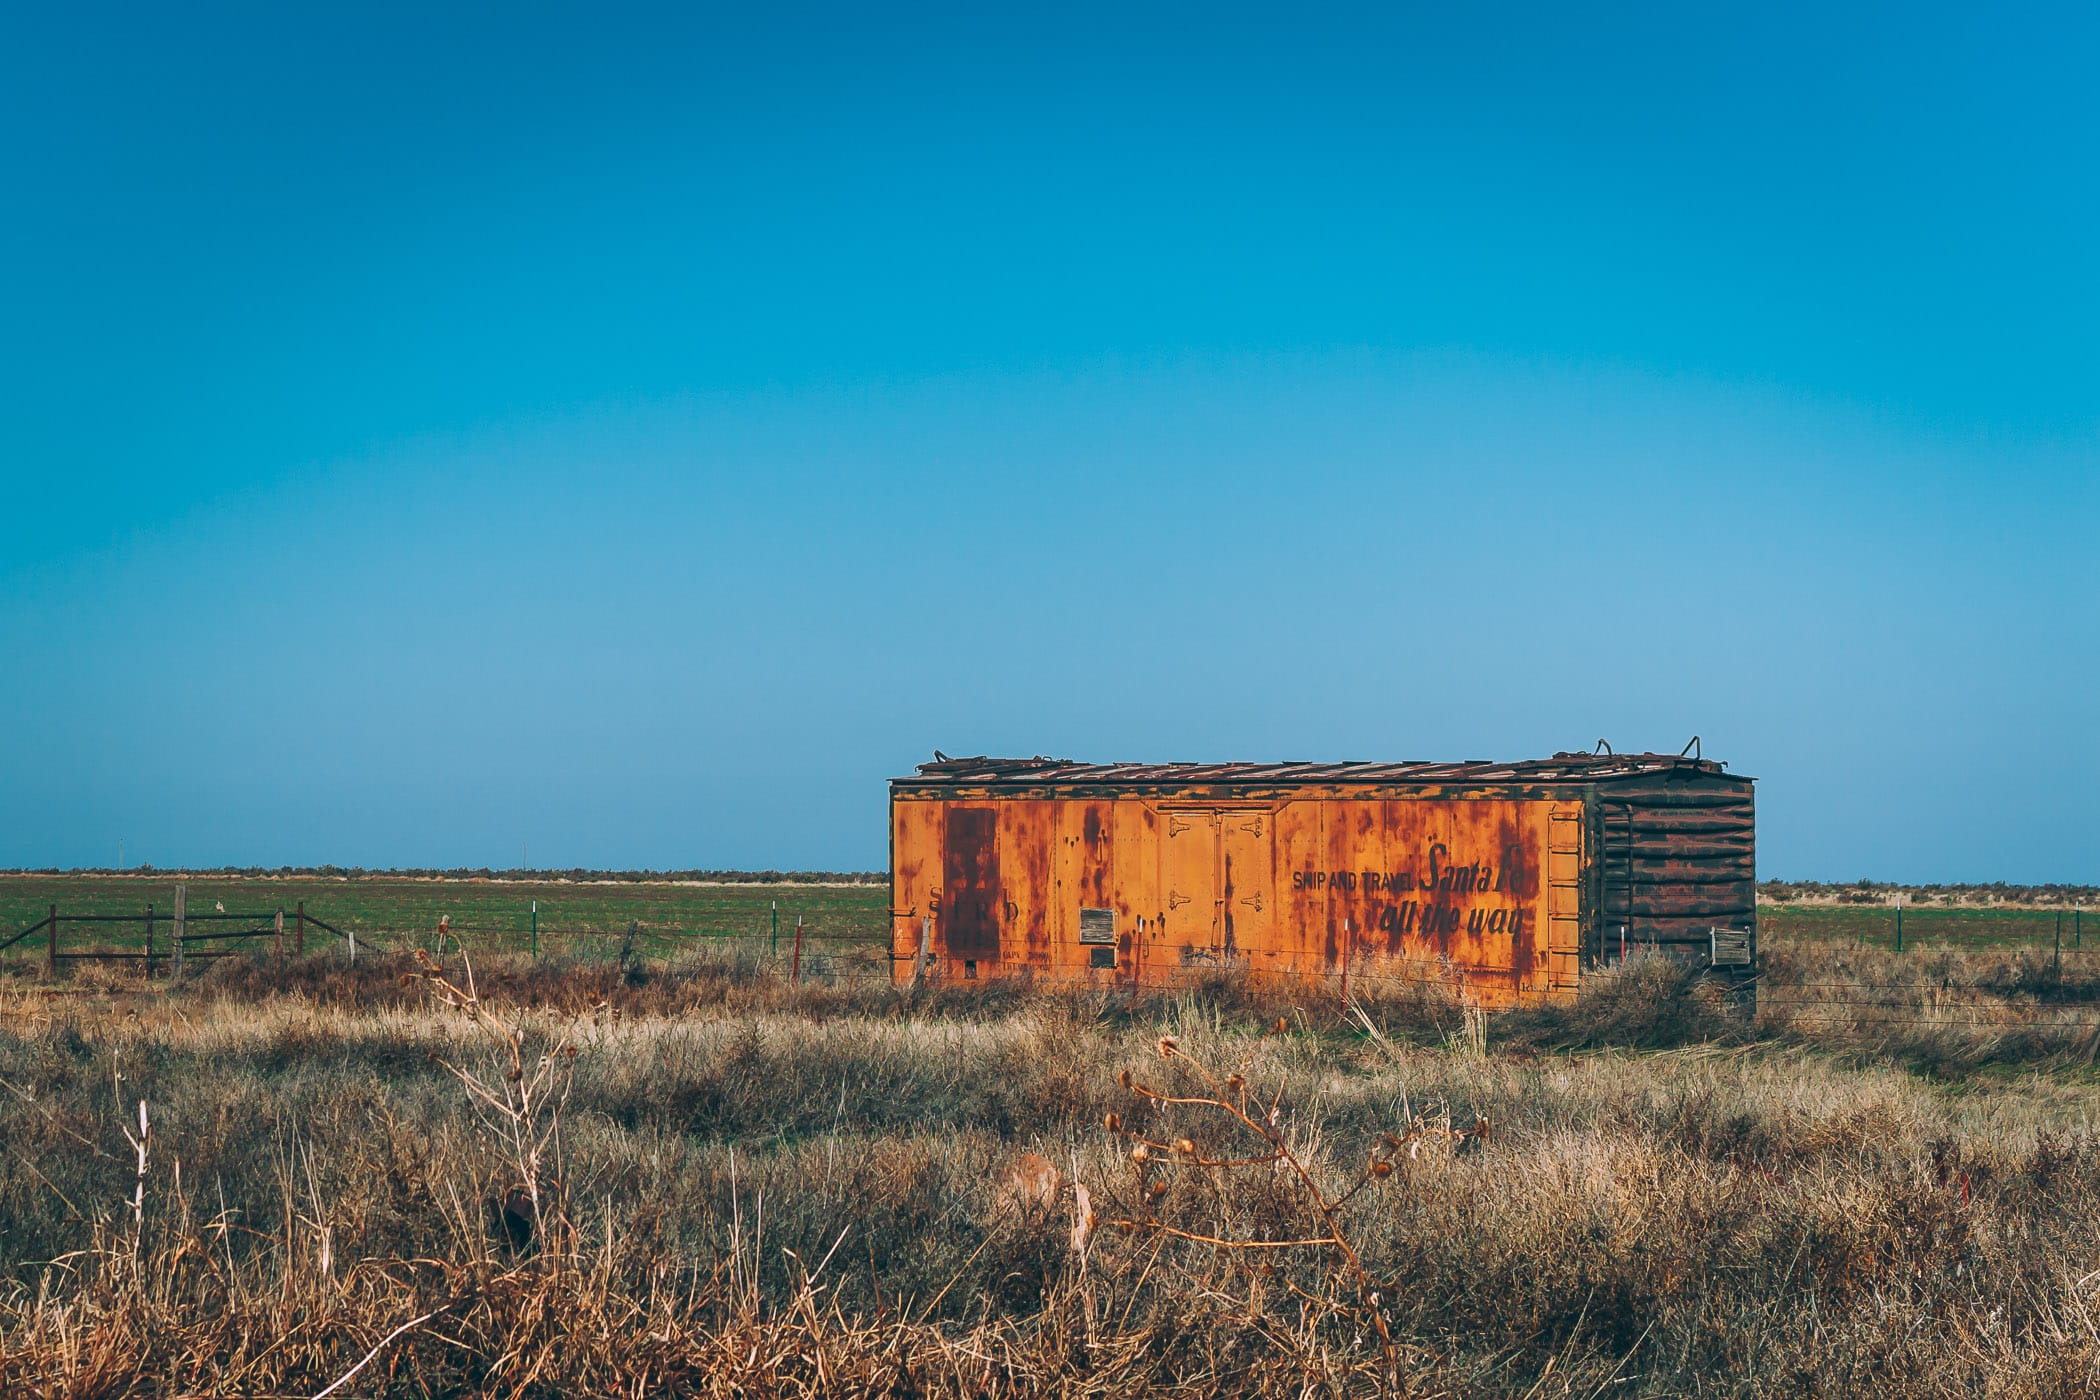 An abandoned boxcar in a field somewhere in the Texas Panhandle.